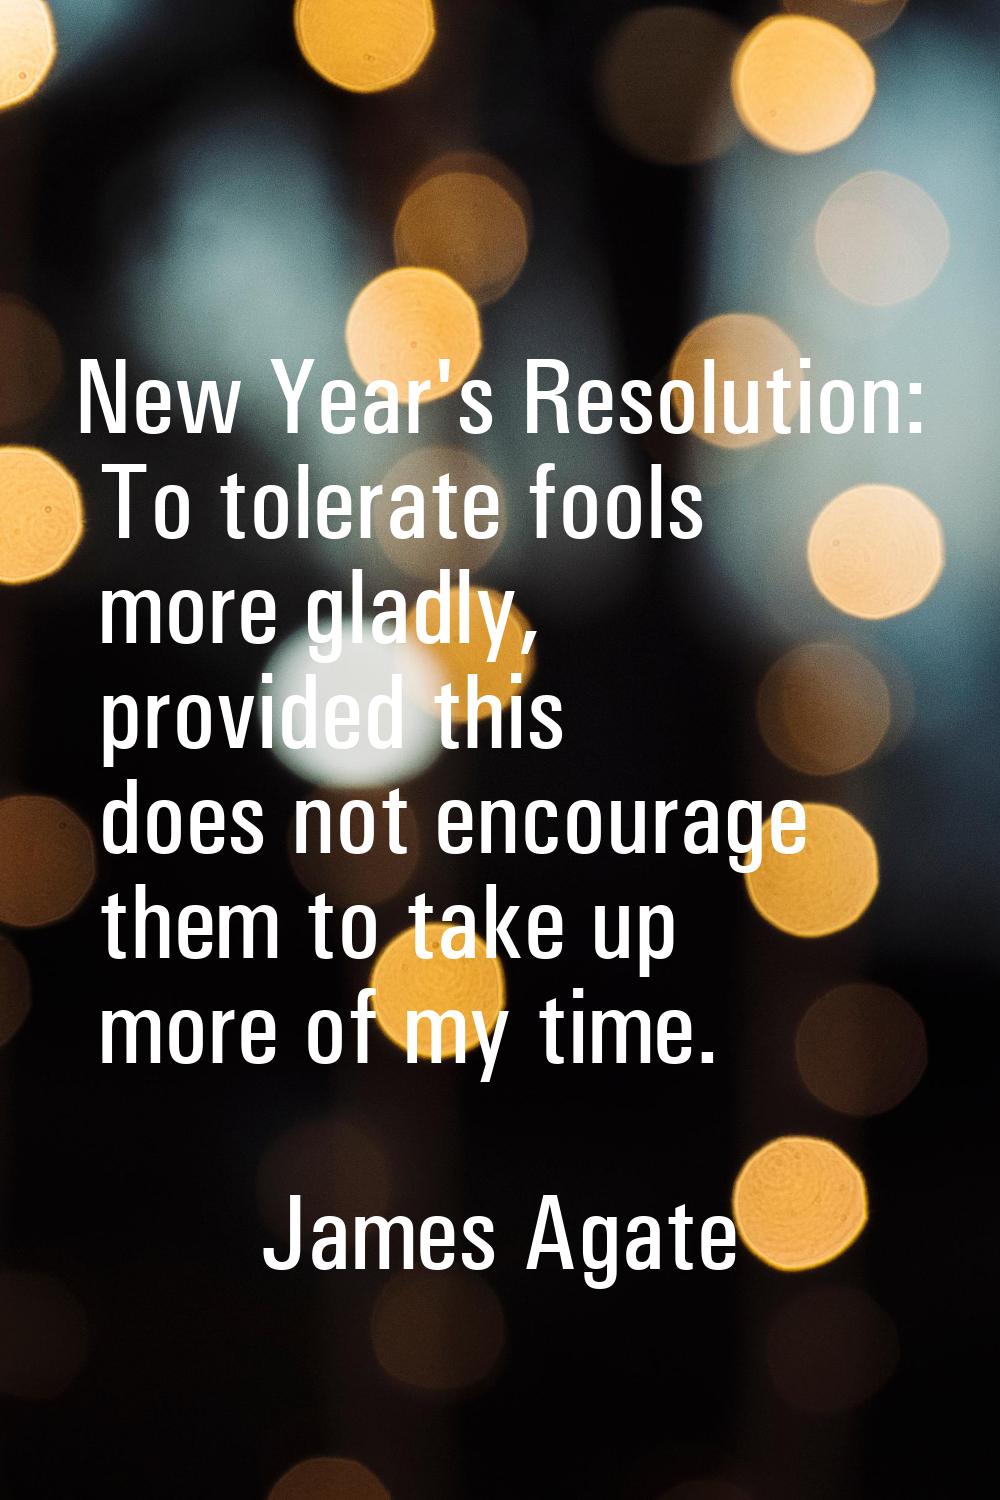 New Year's Resolution: To tolerate fools more gladly, provided this does not encourage them to take